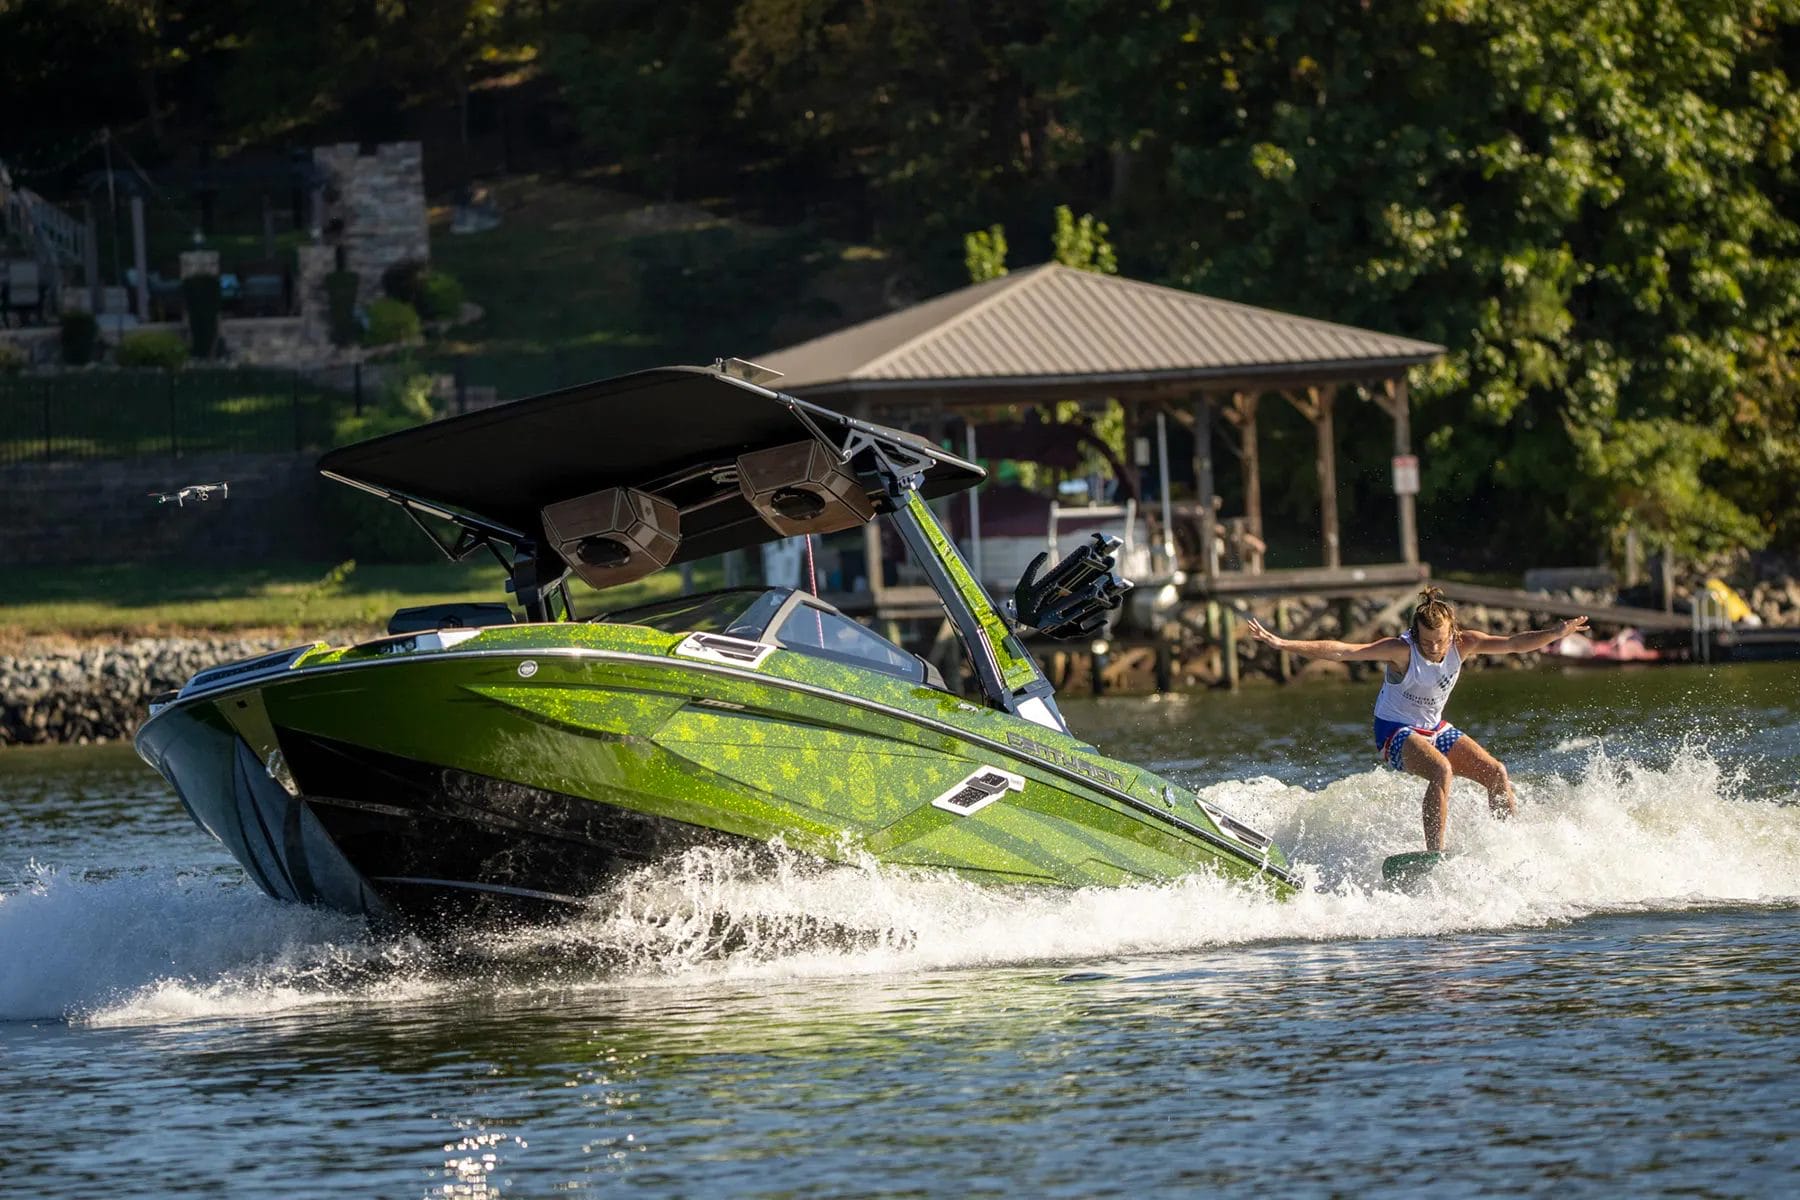 A woman is riding a wakesurf board on a green boat.